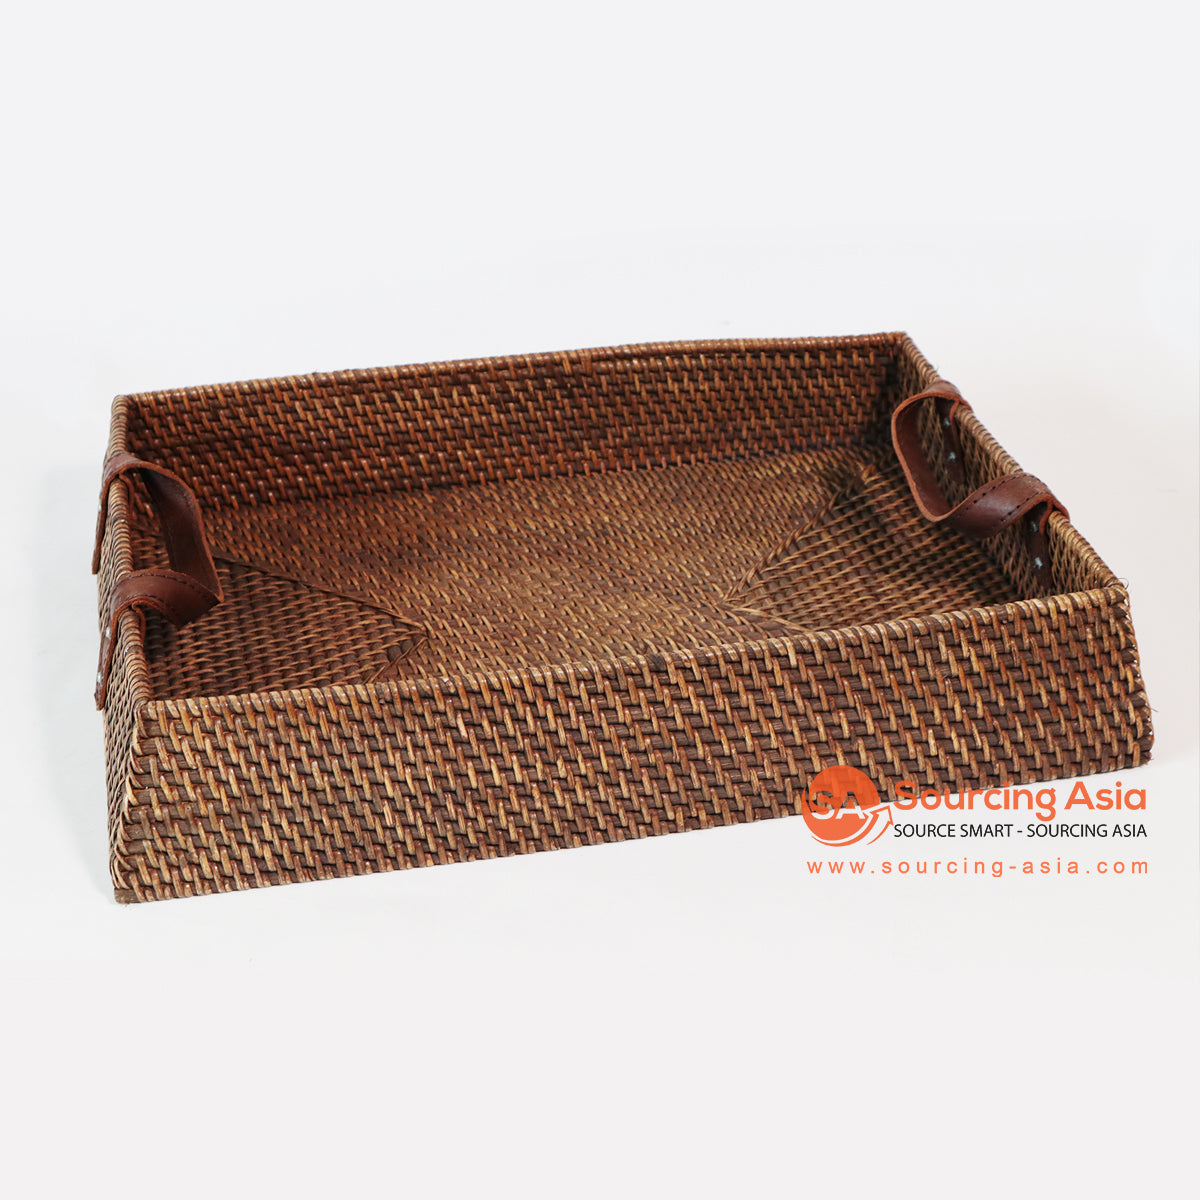 MTIC028 DARK BROWN WOVEN RATTAN SQUARE TRAY WITH LEATHER HANDLE